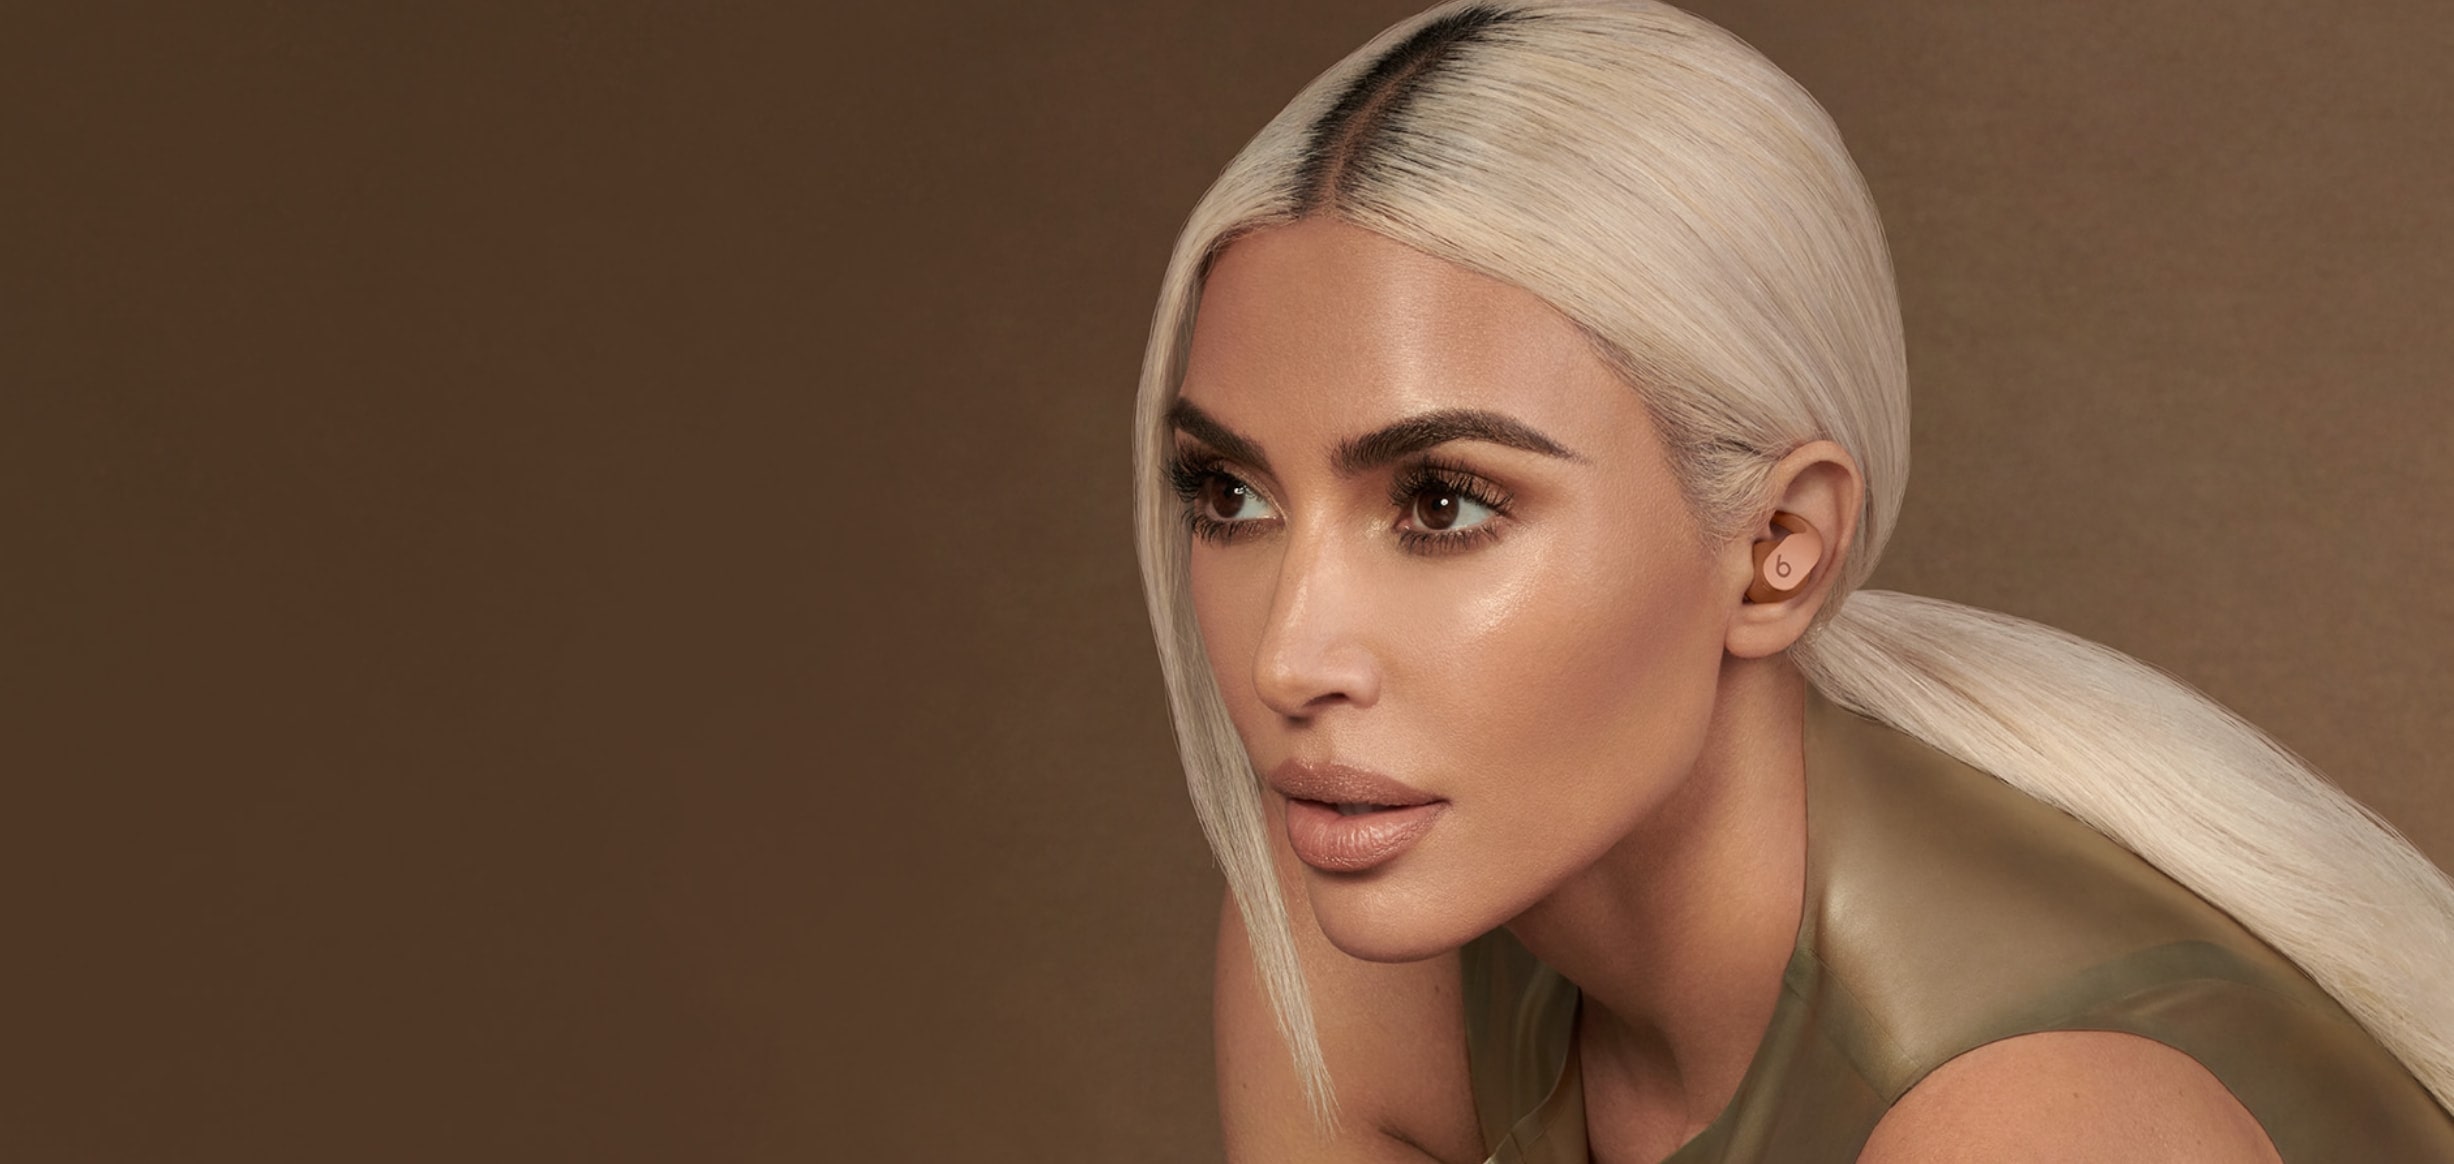 Kim Kardashian teams up with Beats for neutral coloured earbuds